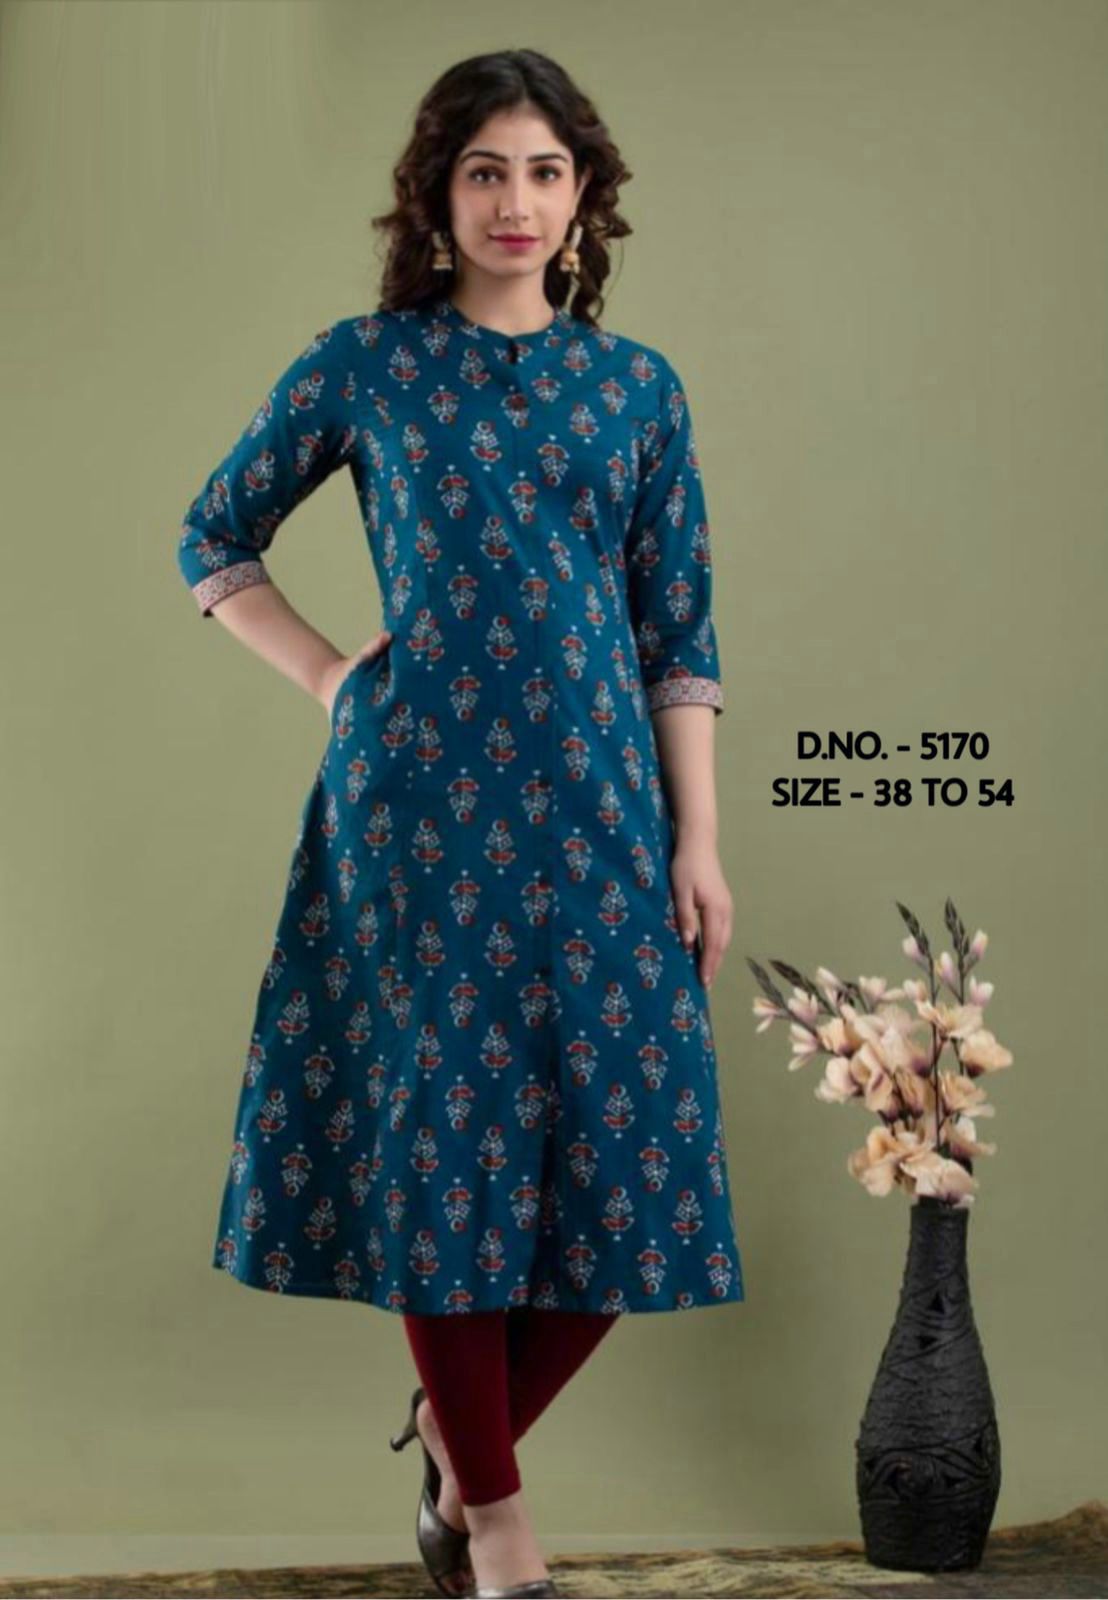 Top 10 Trending And Stylish Kurti Designs To Look Smart and Chic